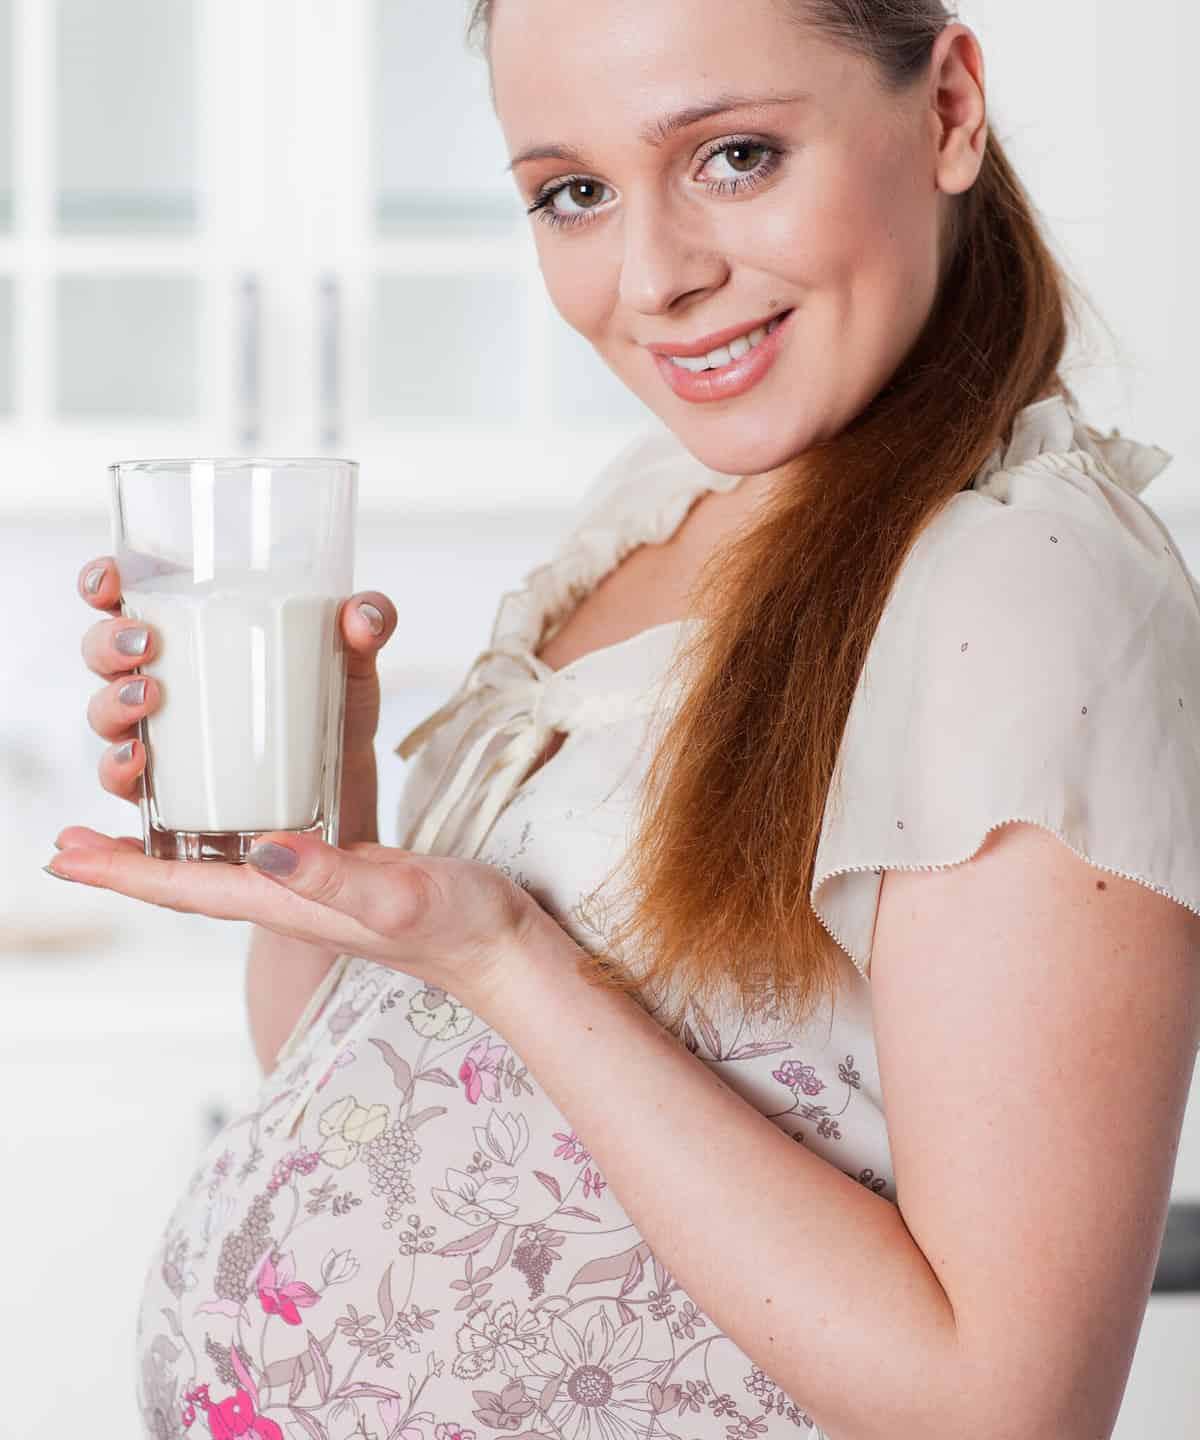 Smiling pregnant woman with a glass of milk